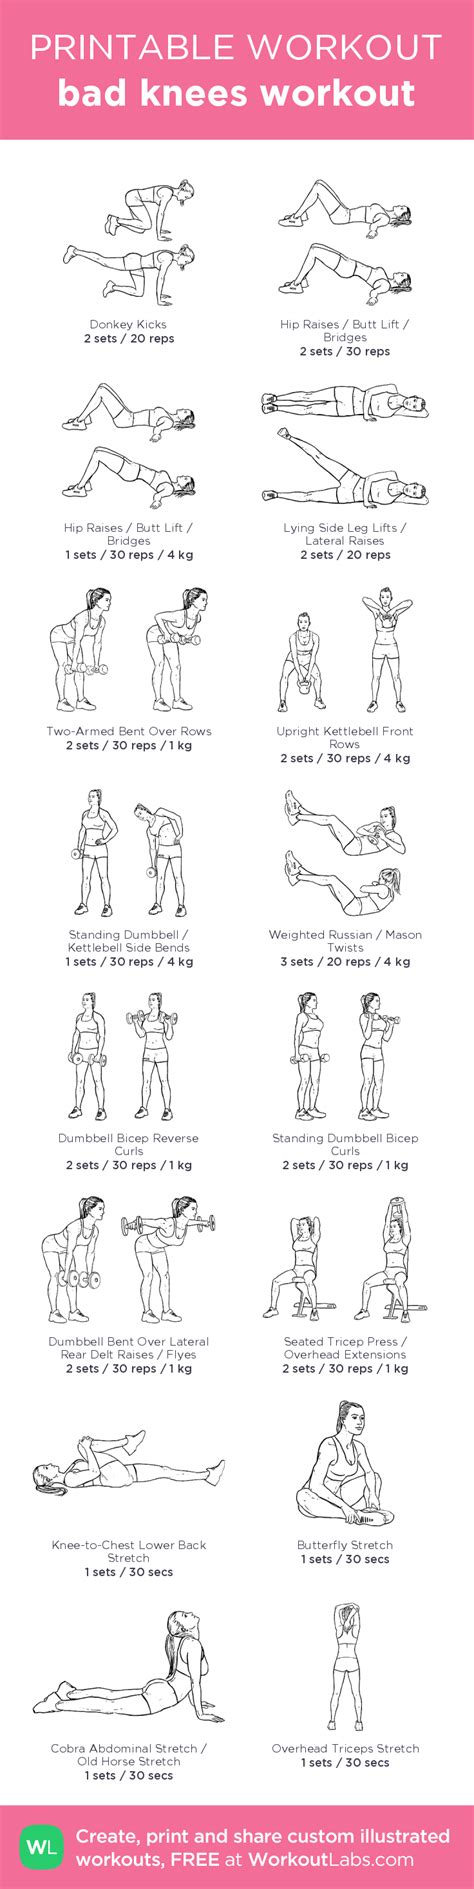 Bad Knees Workout Illustrated Exercise Plan Created At